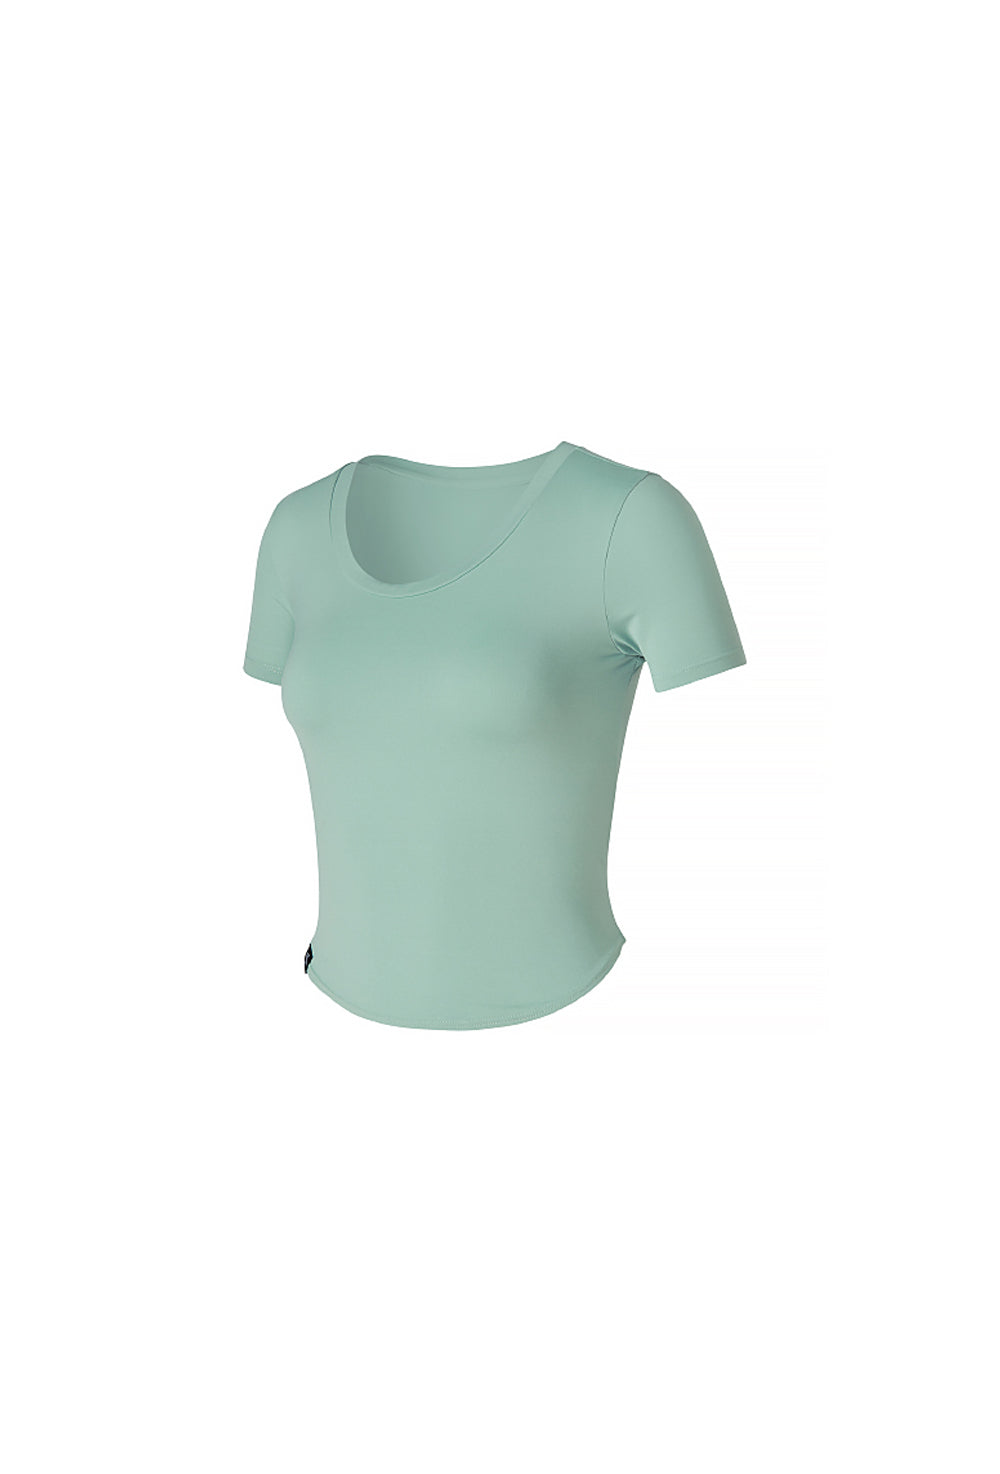 XELLA Light Round Crop Top - Just Mint (Clearance)